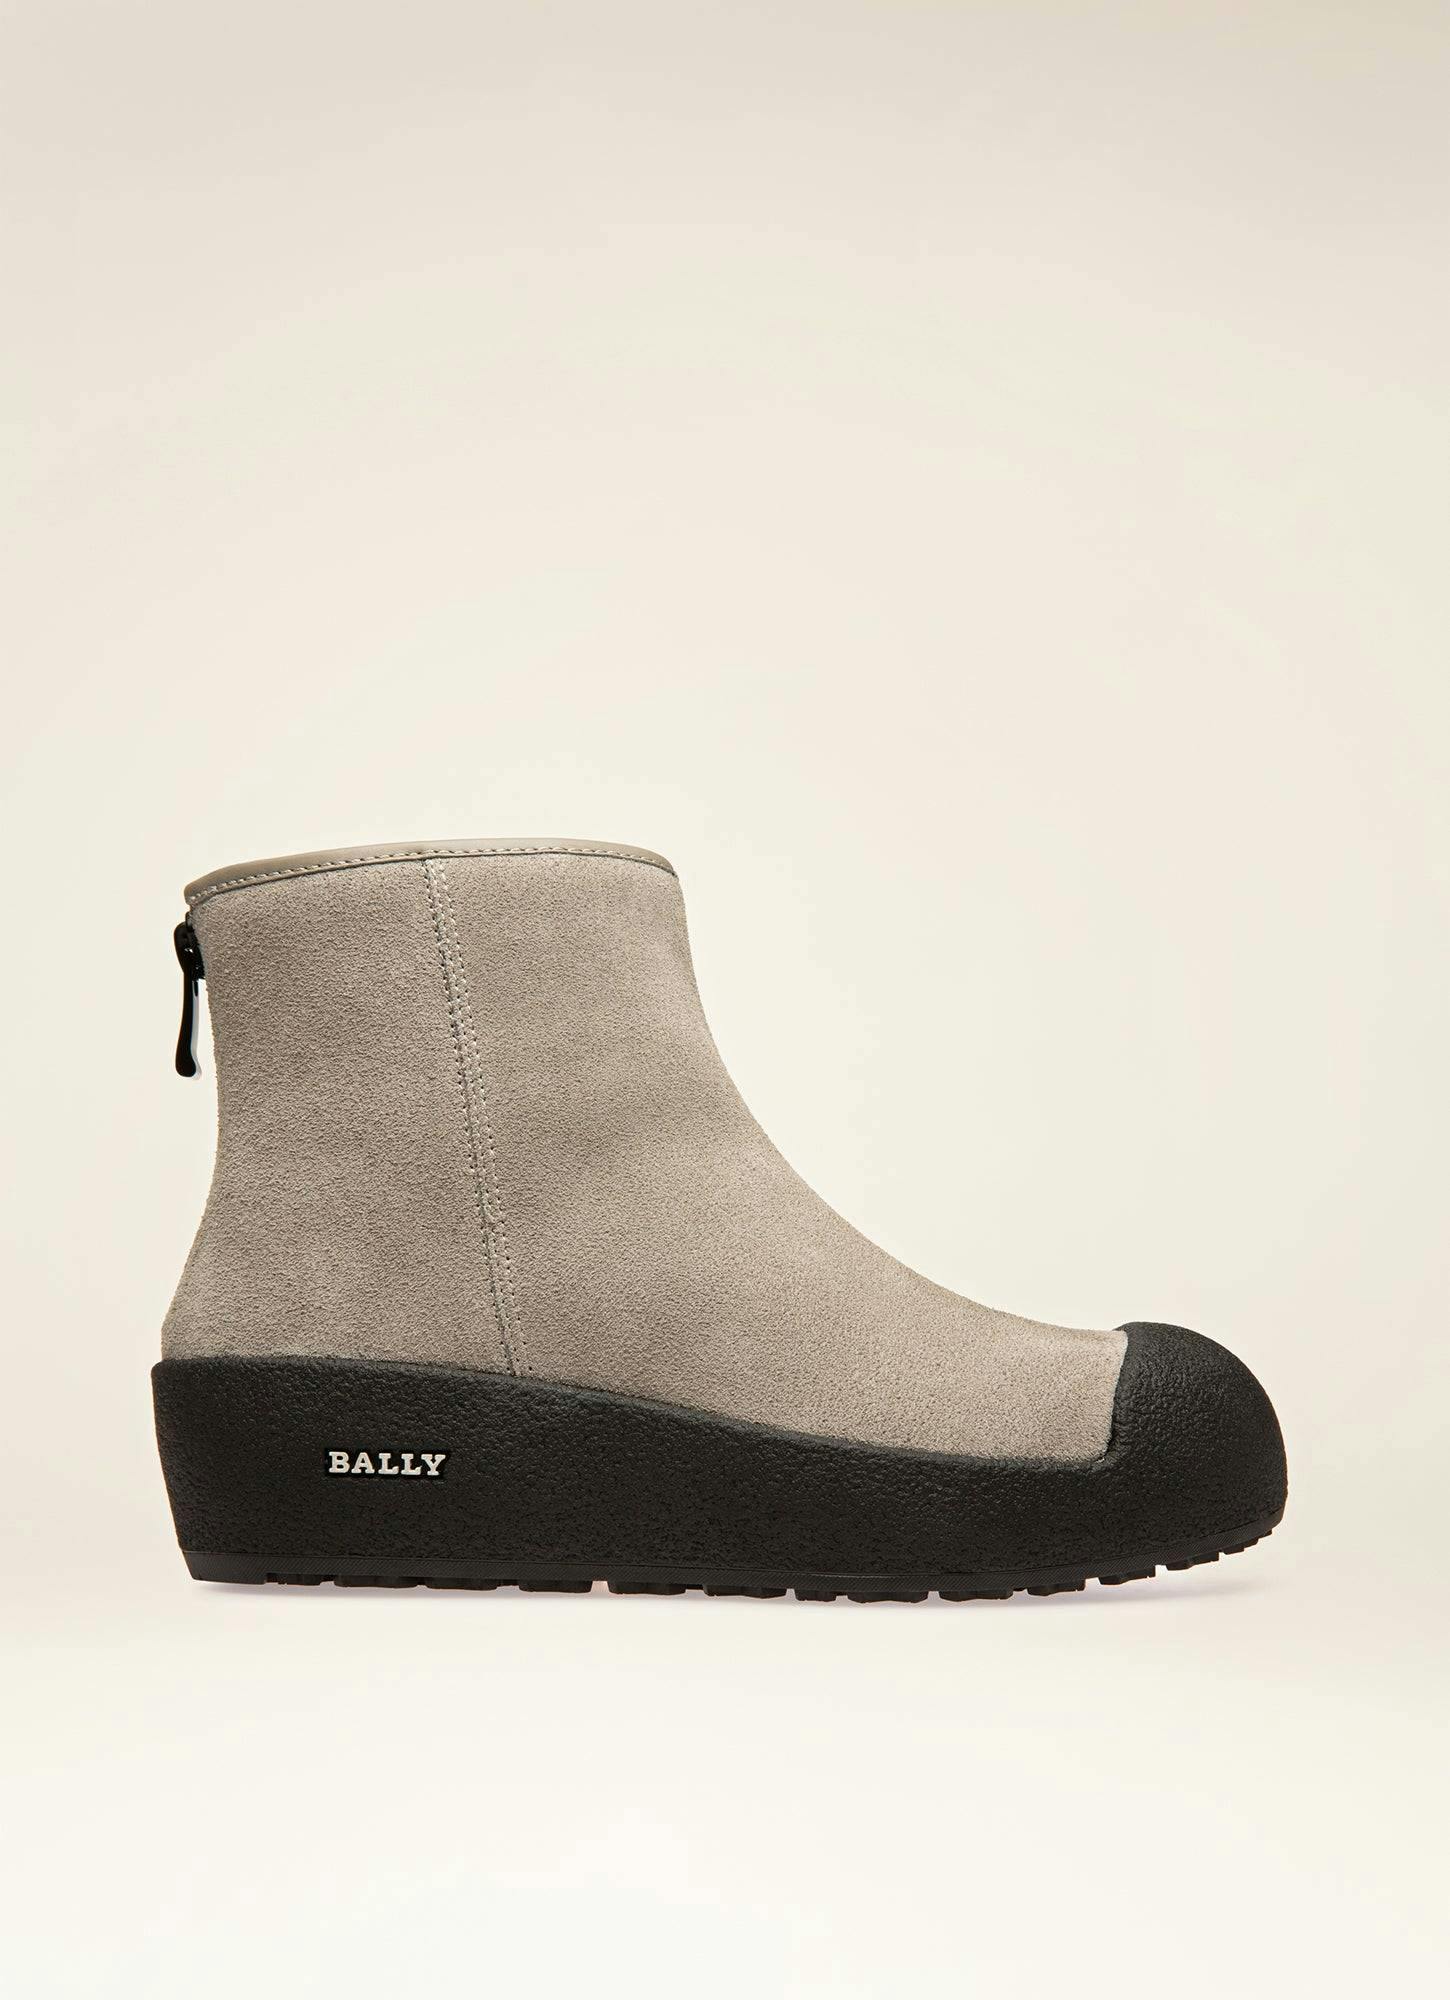 BALLY CURLING Leather Boots In Grey - Women's - Bally - 01